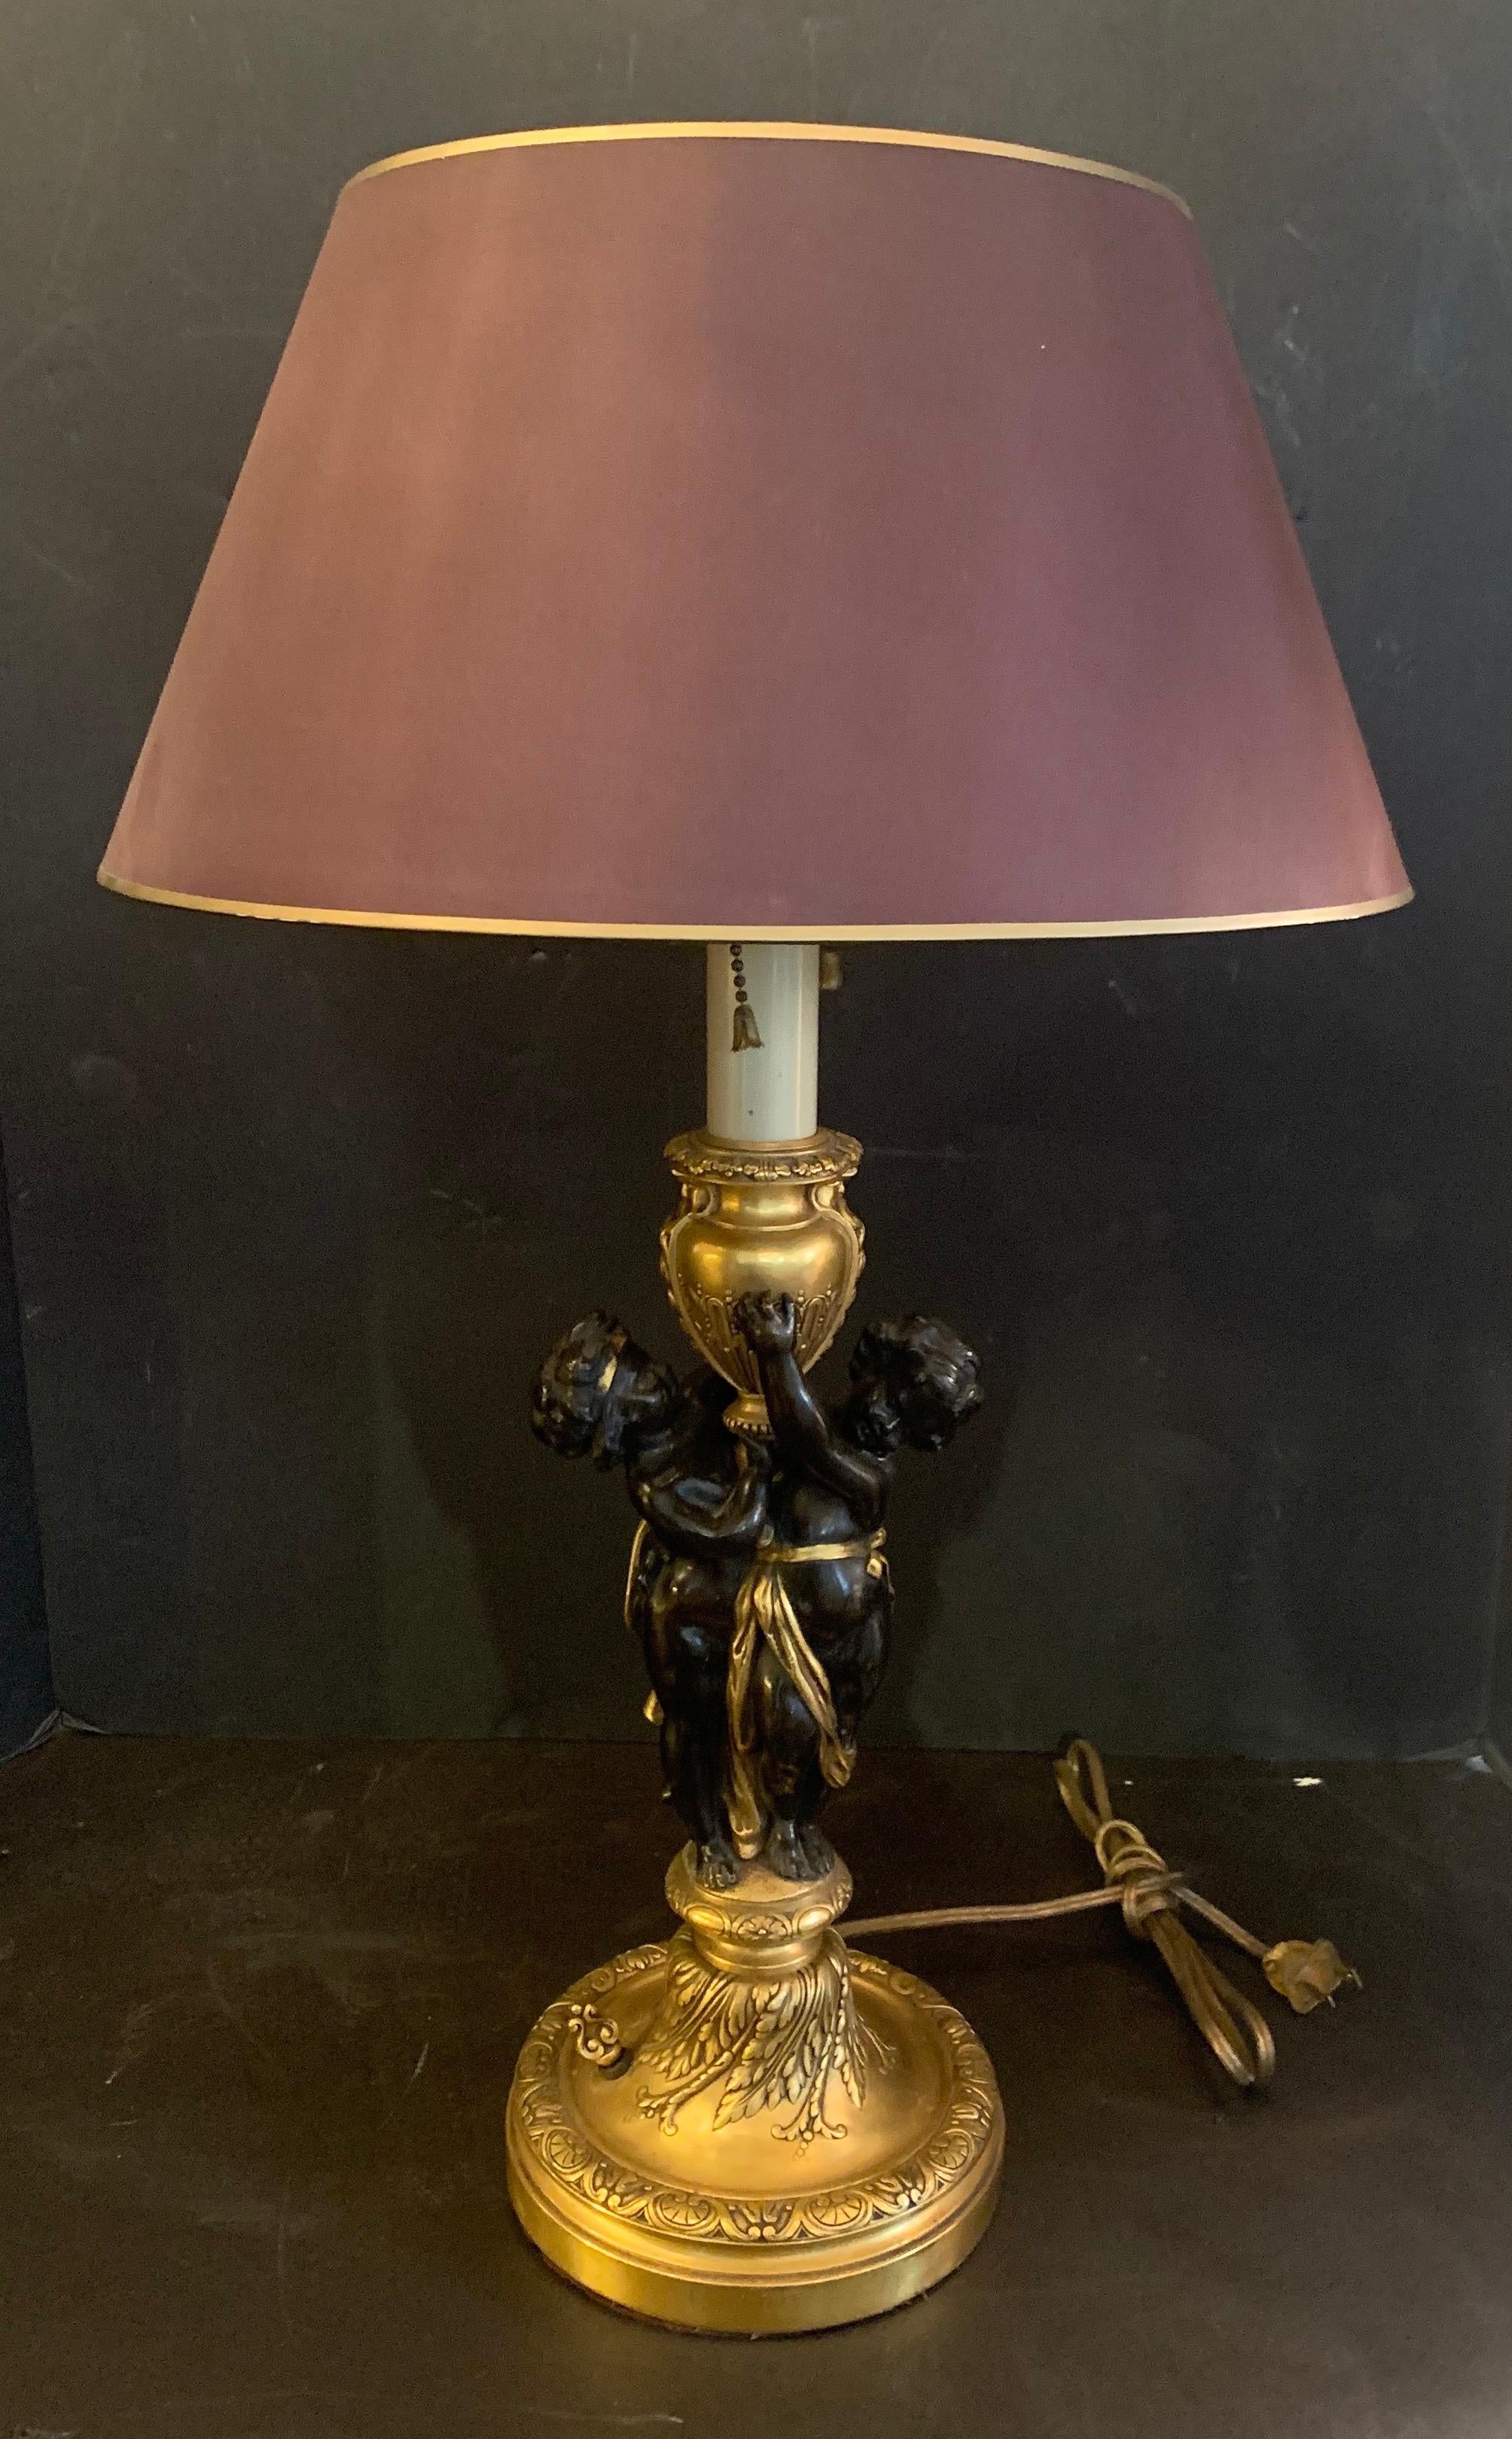 A rare and wonderful pair of E.F. Caldwell Stamped, French bronze patinated and gilt putti / double cherub figures holding up an urn lamps, rewired and accompanied by silk covered shades.
Superb quality!
 
With shade: 14